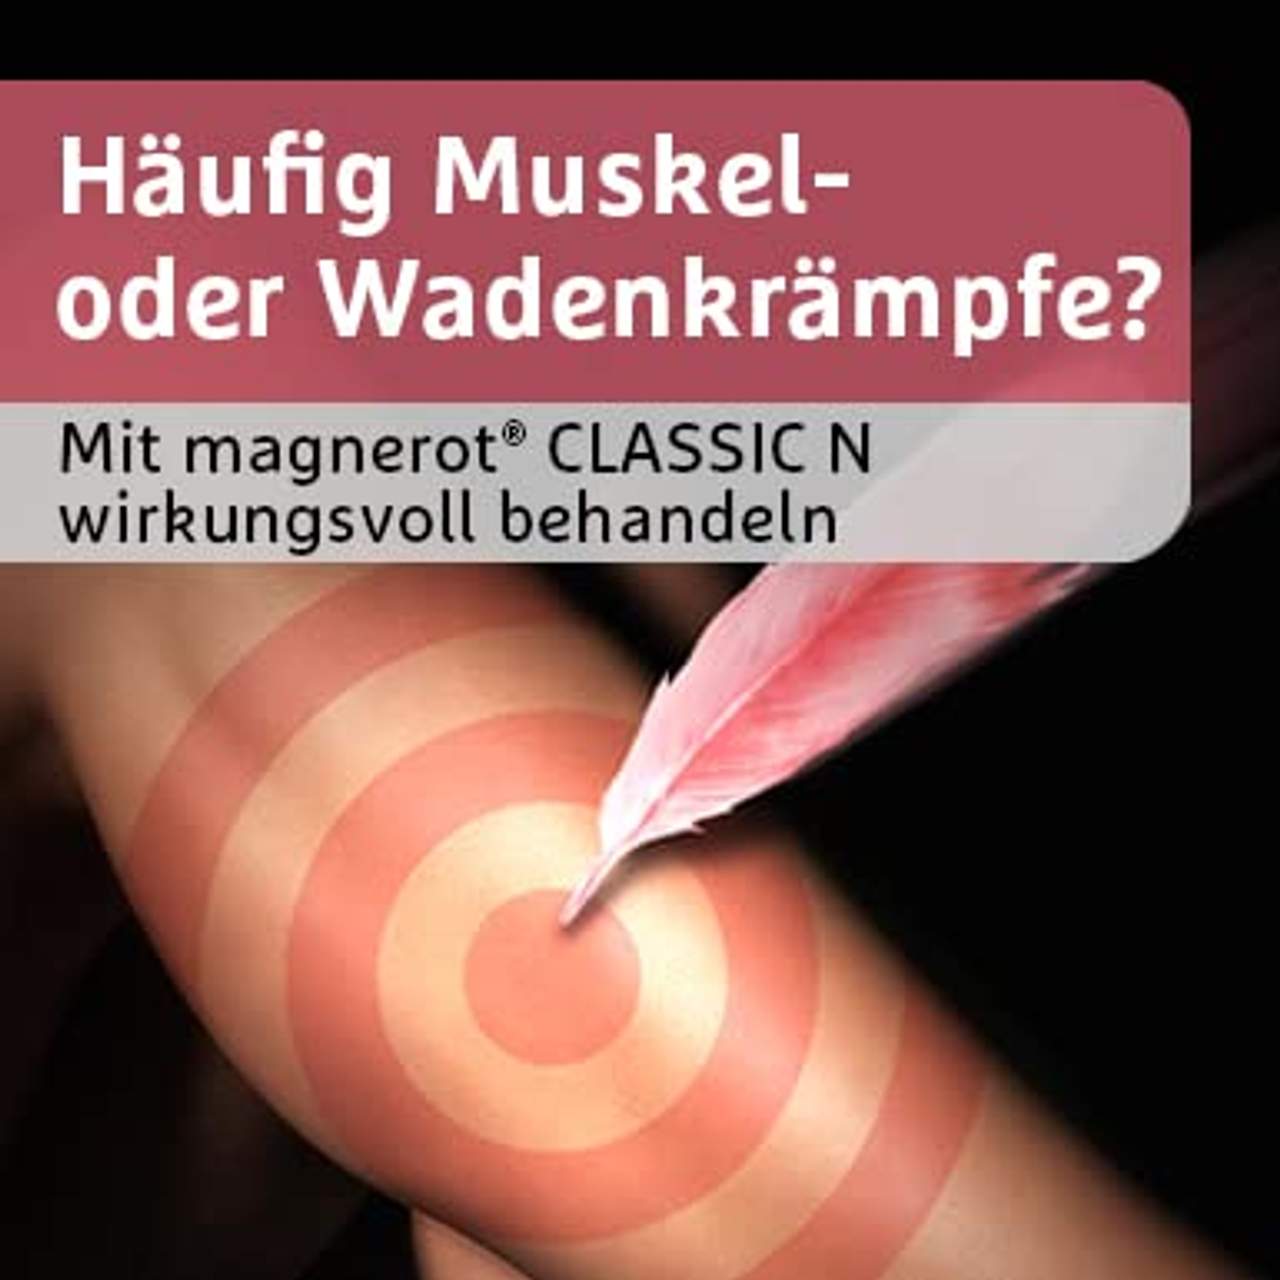 magnerot Classic N Tabletten